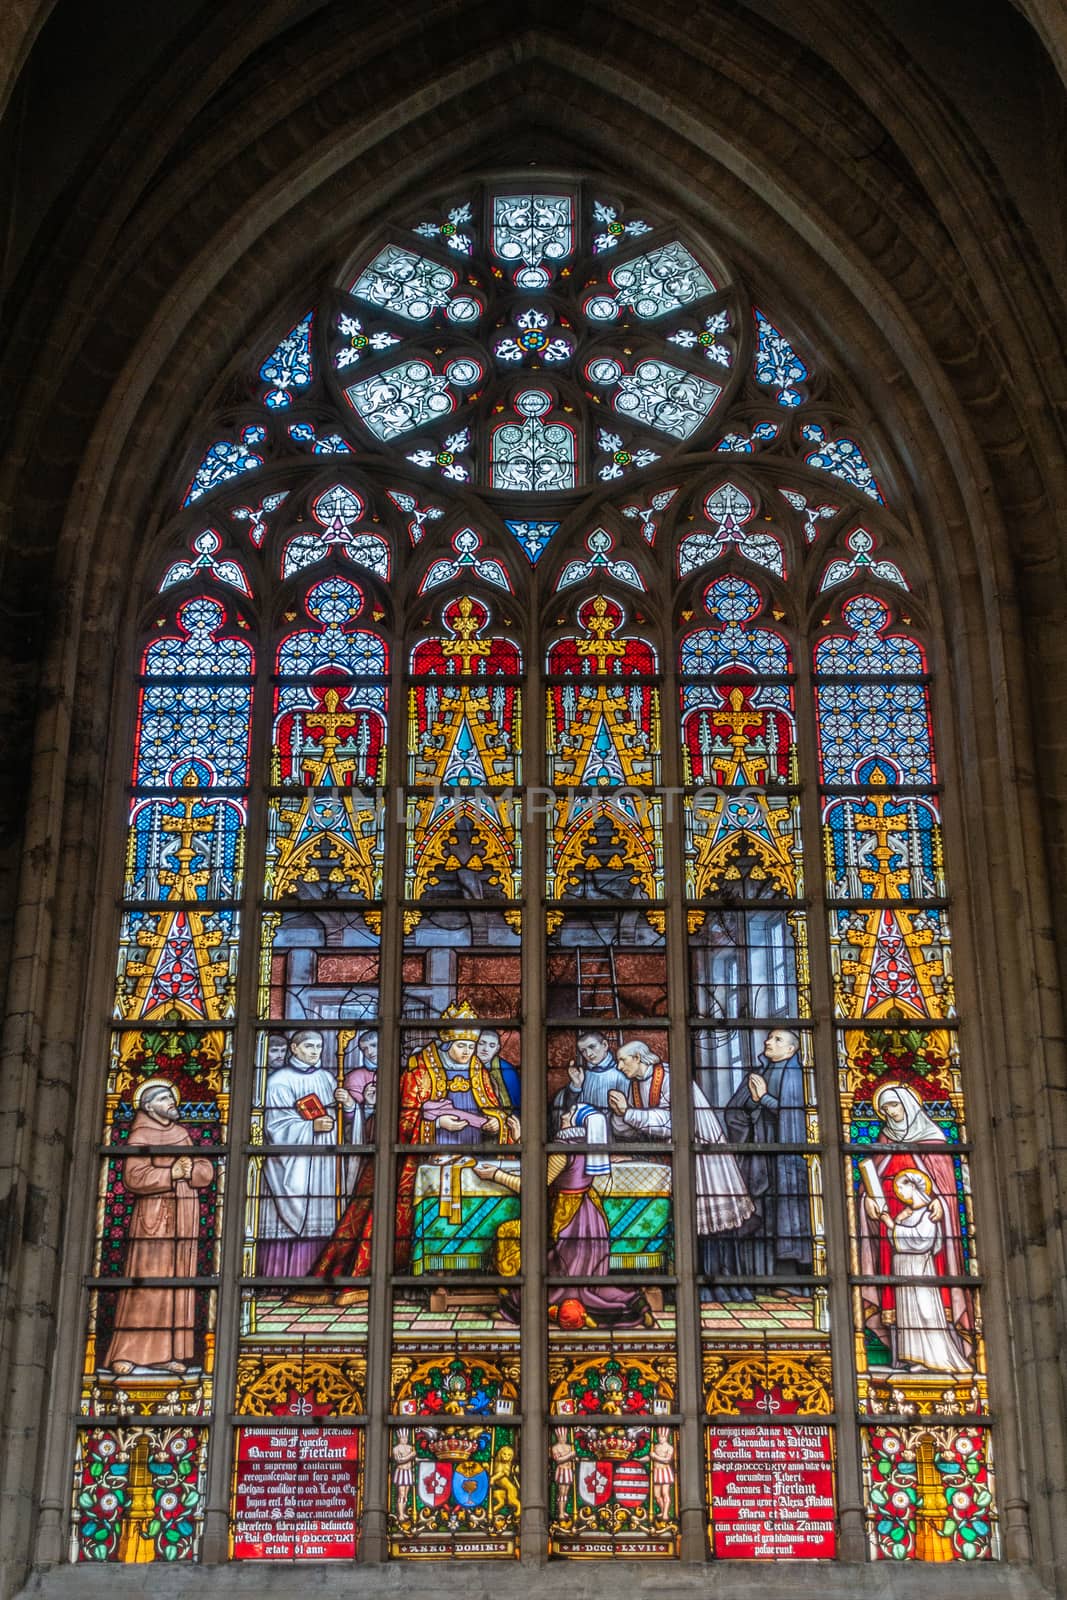 Stained glass window of Cathedral of St. Michael and St, Gudula, by Claudine